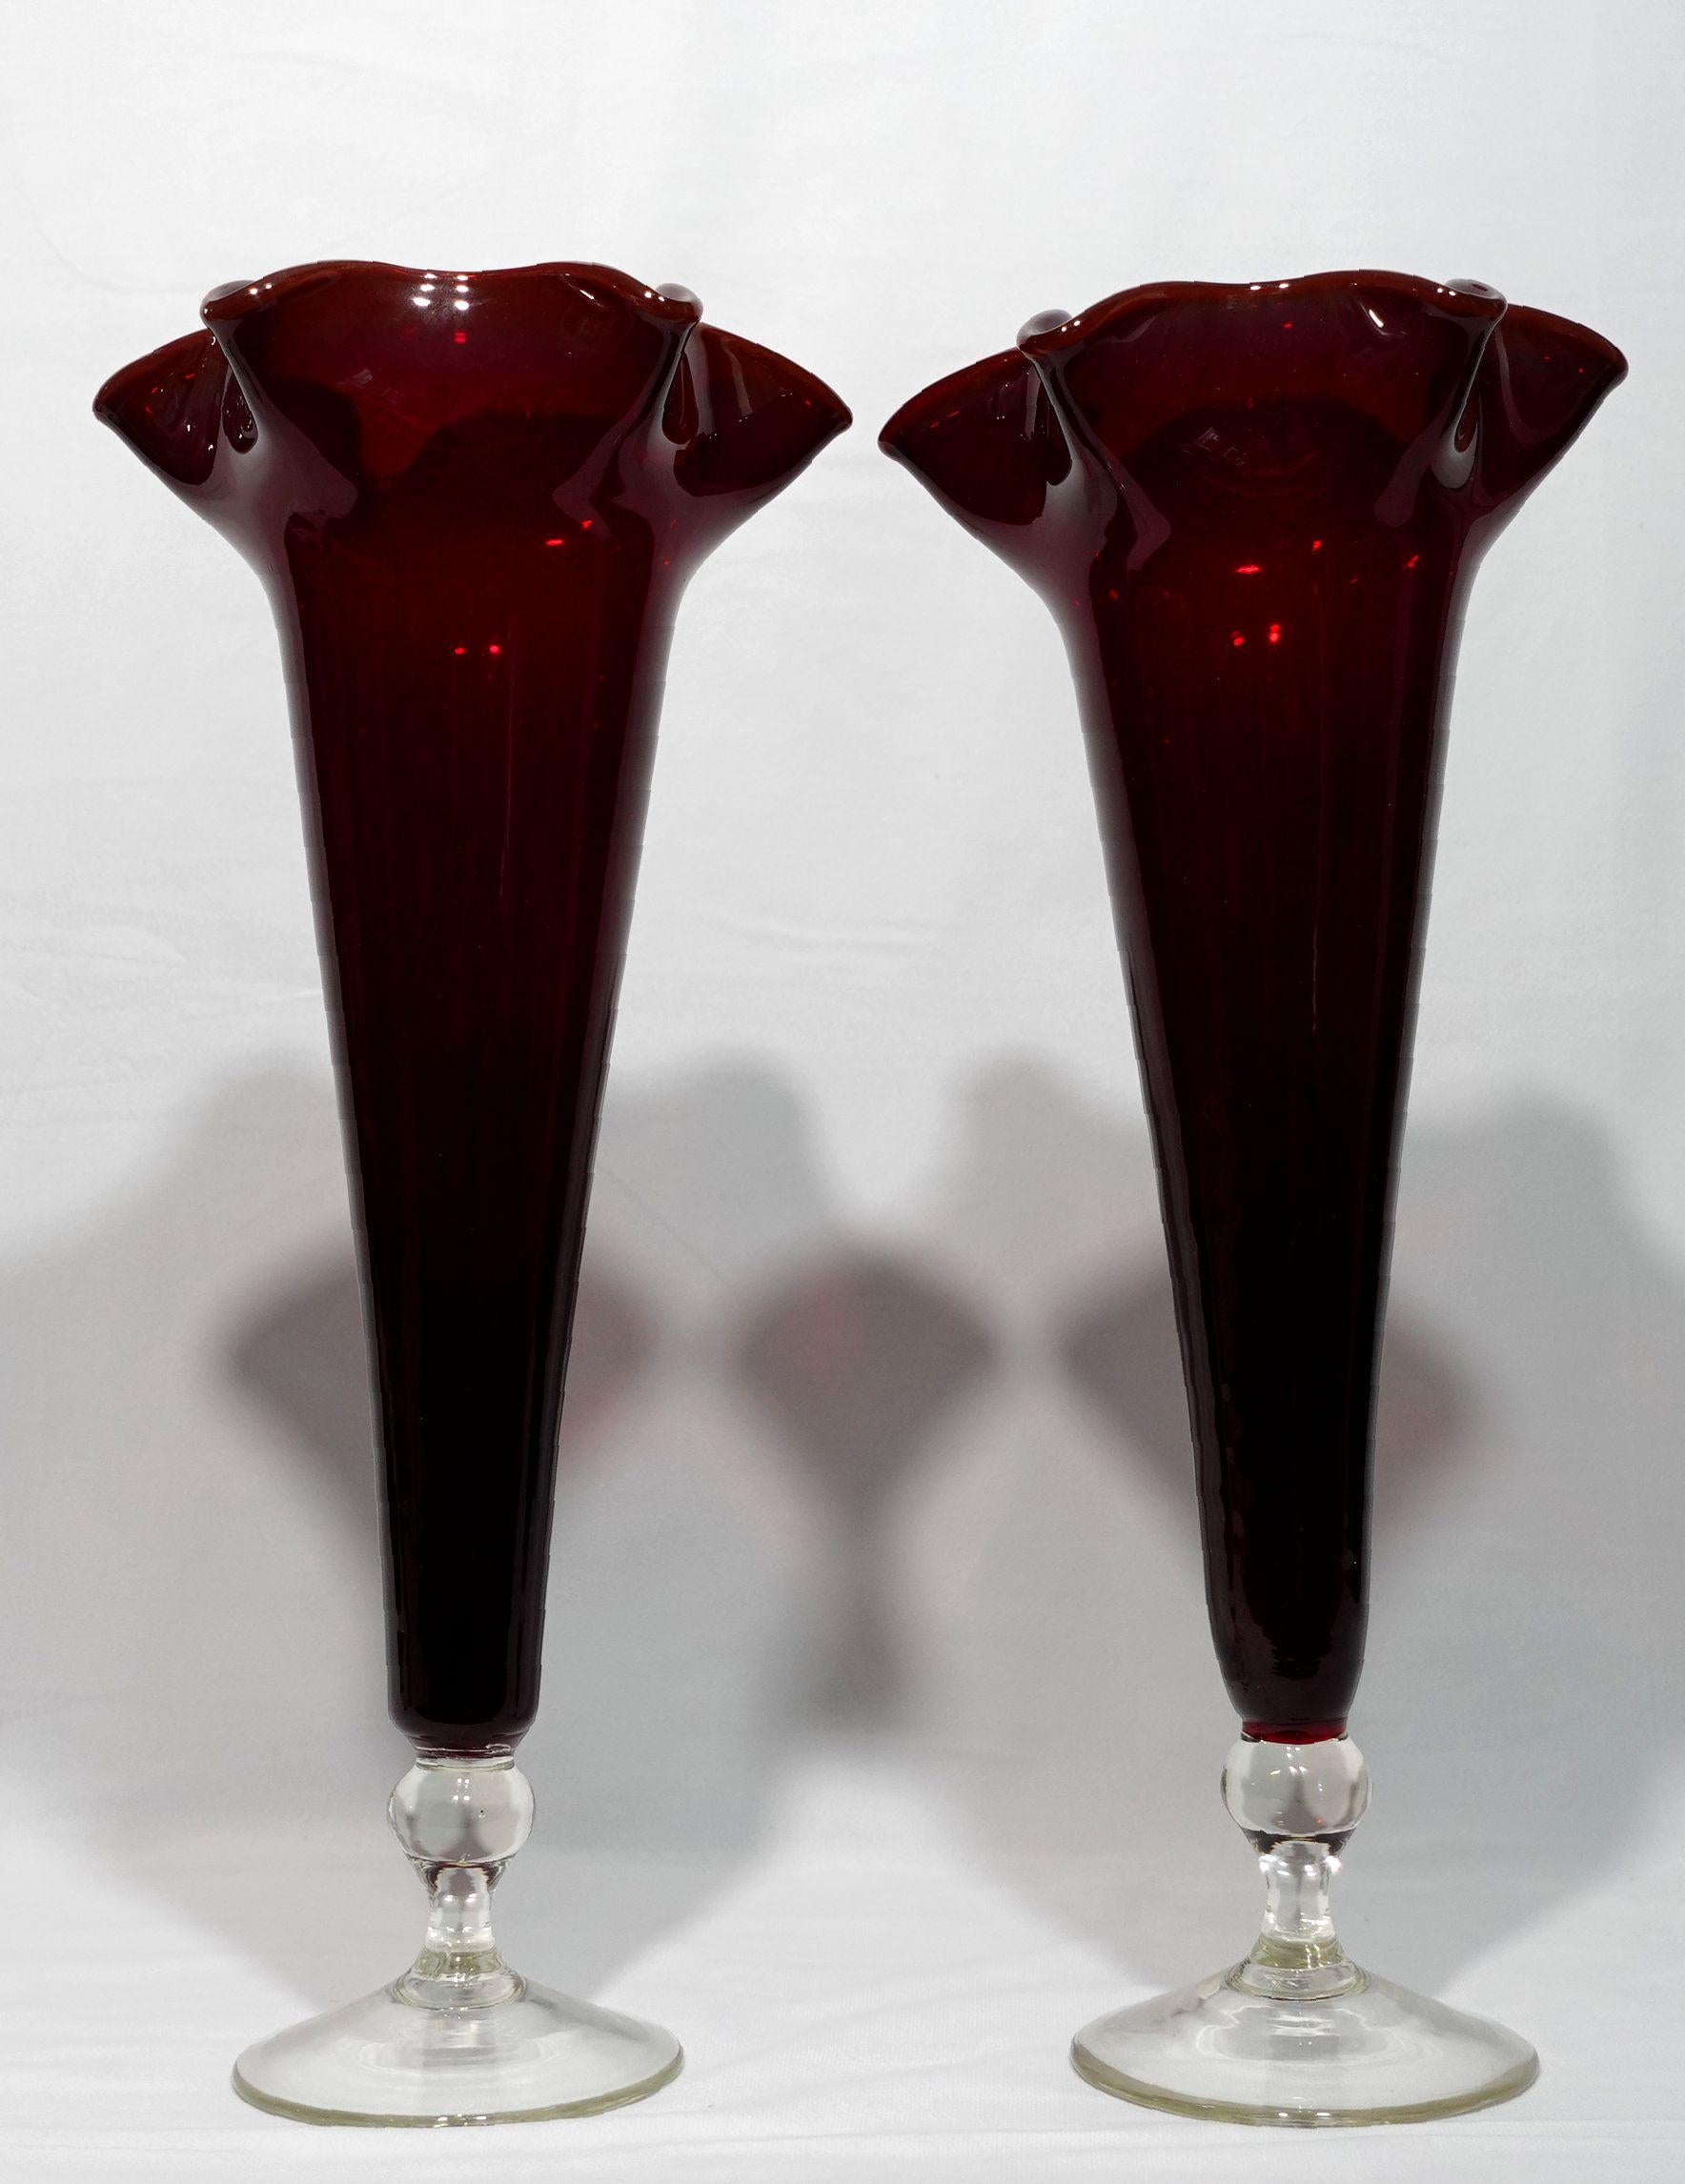 A Pair of Large Ruby and Clear Trumpet Vases with a very rich ruby color down to the base became clear. They have very elegant forms from the circular bases narrowed up and increased the diameters of the body to form the trumpet shapes with the